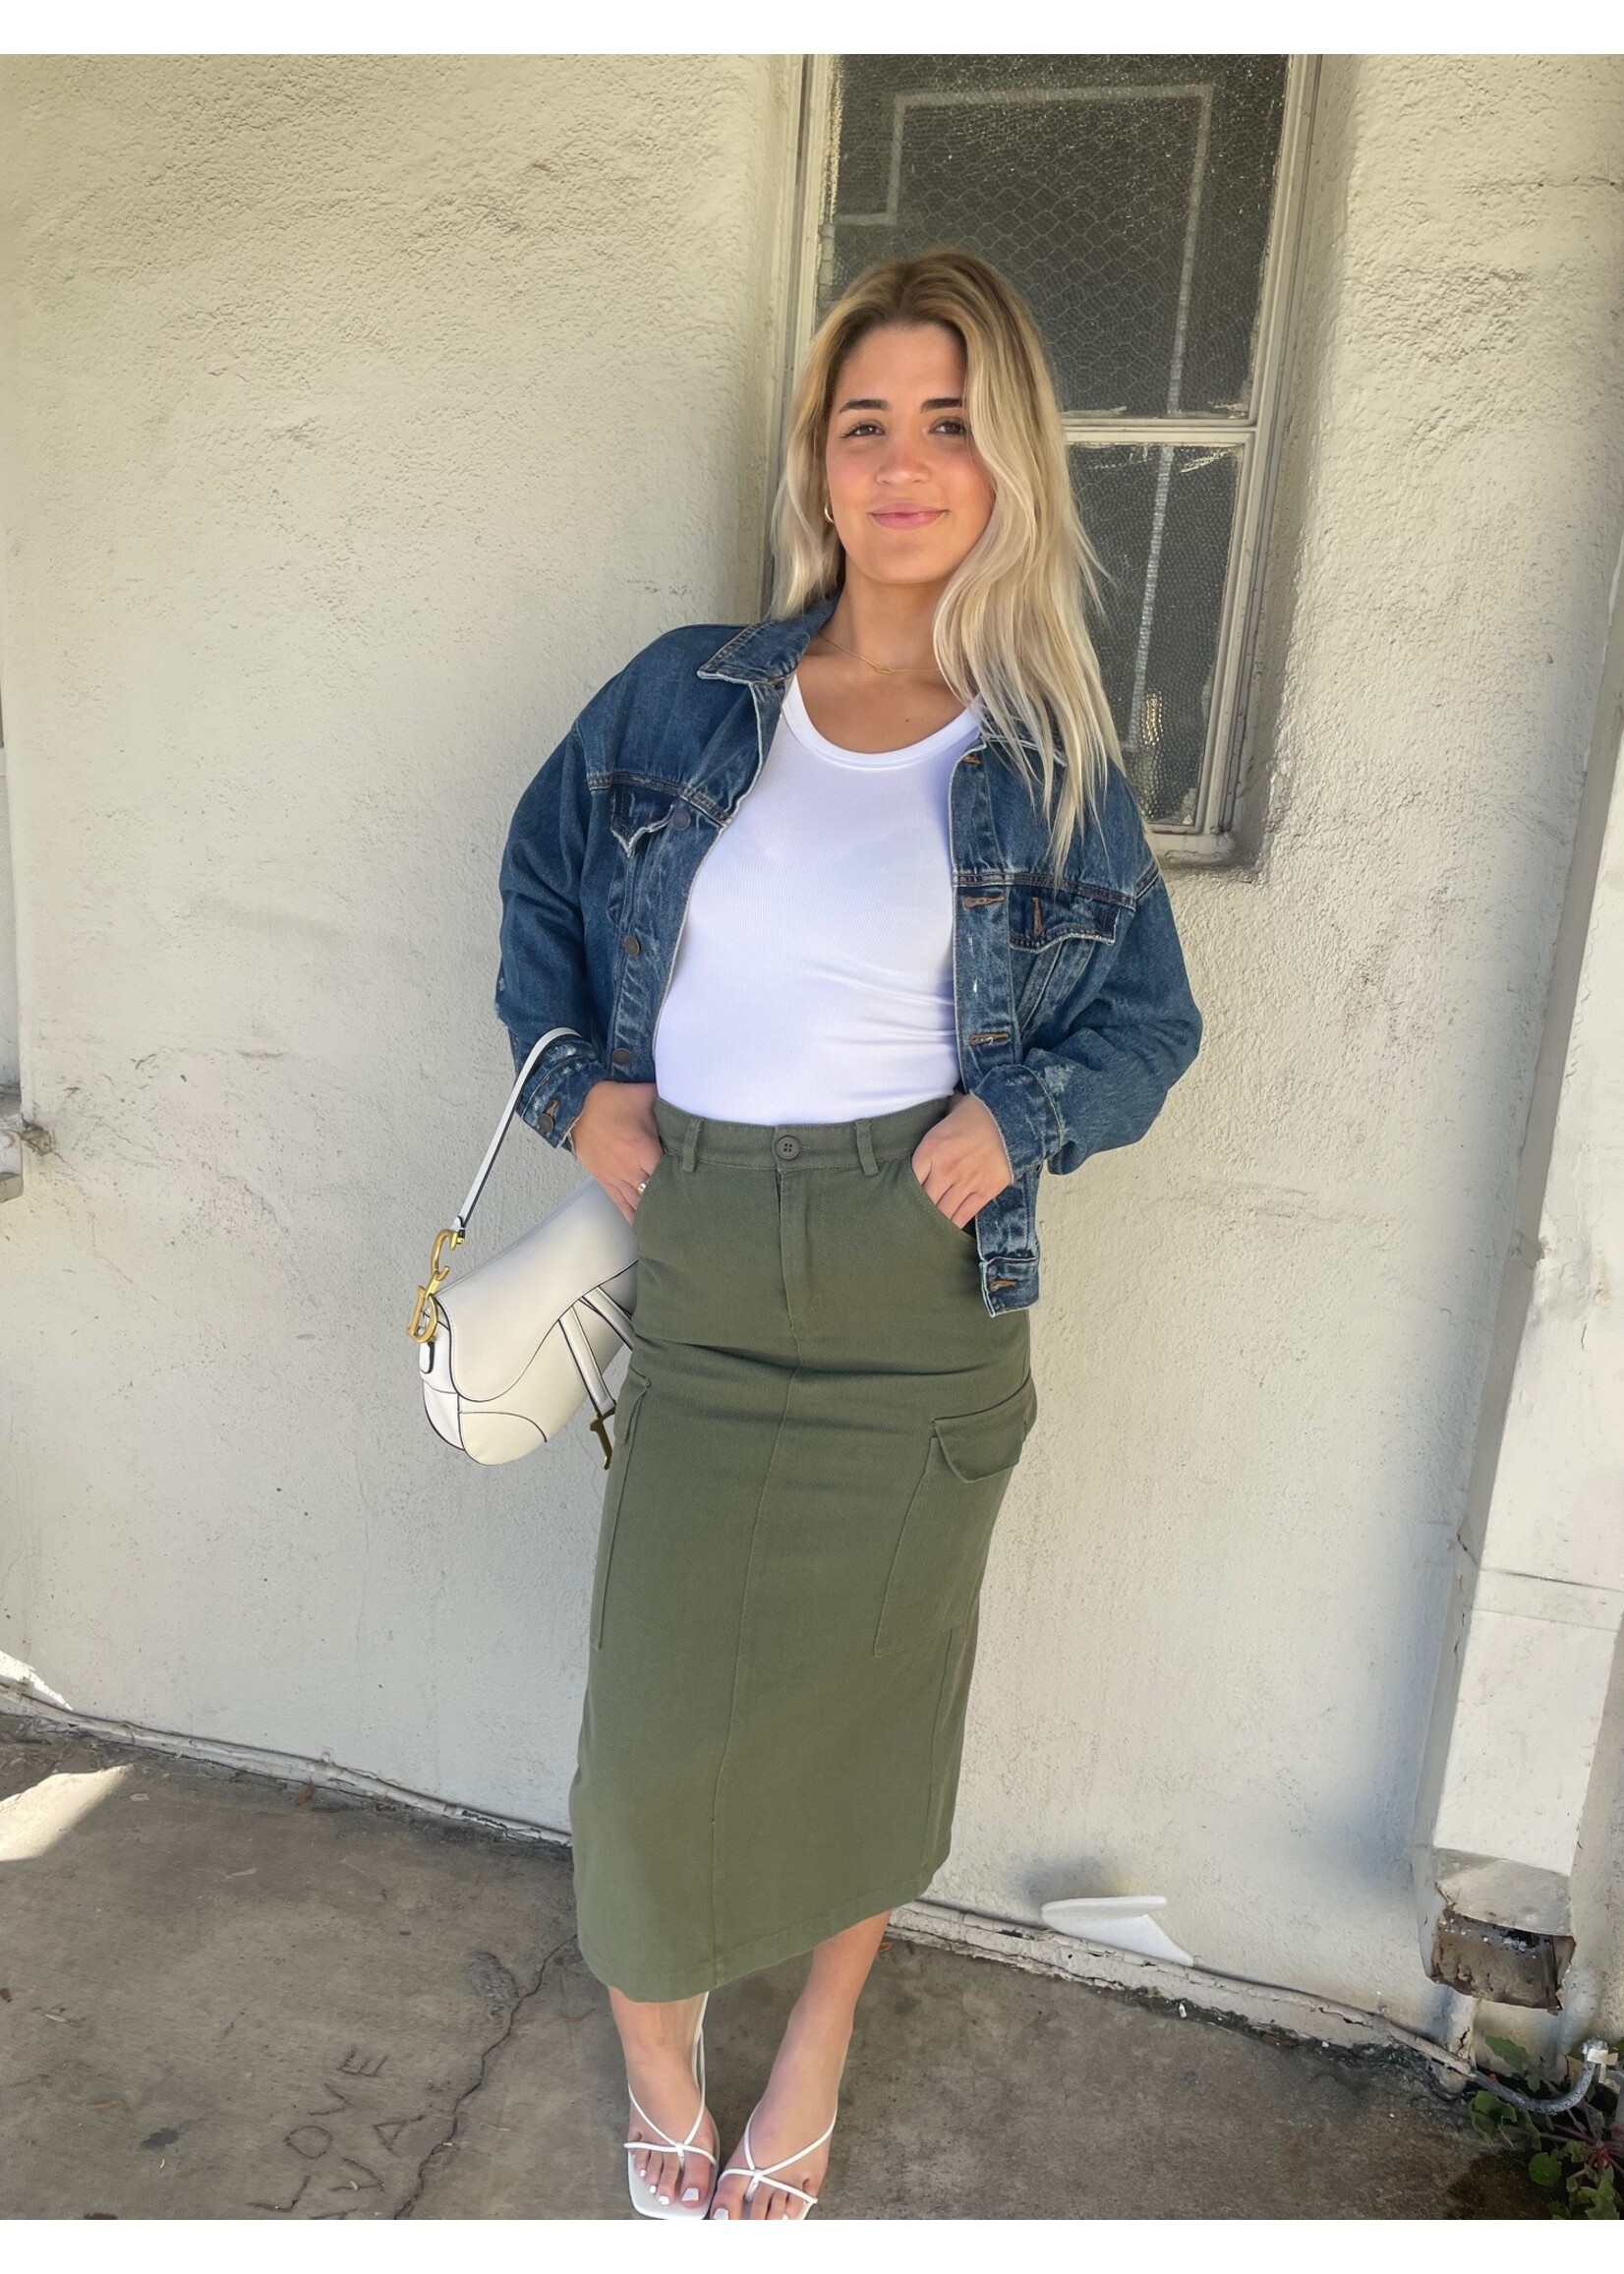 OLIVACEOUS Cute in Cargos Skirt